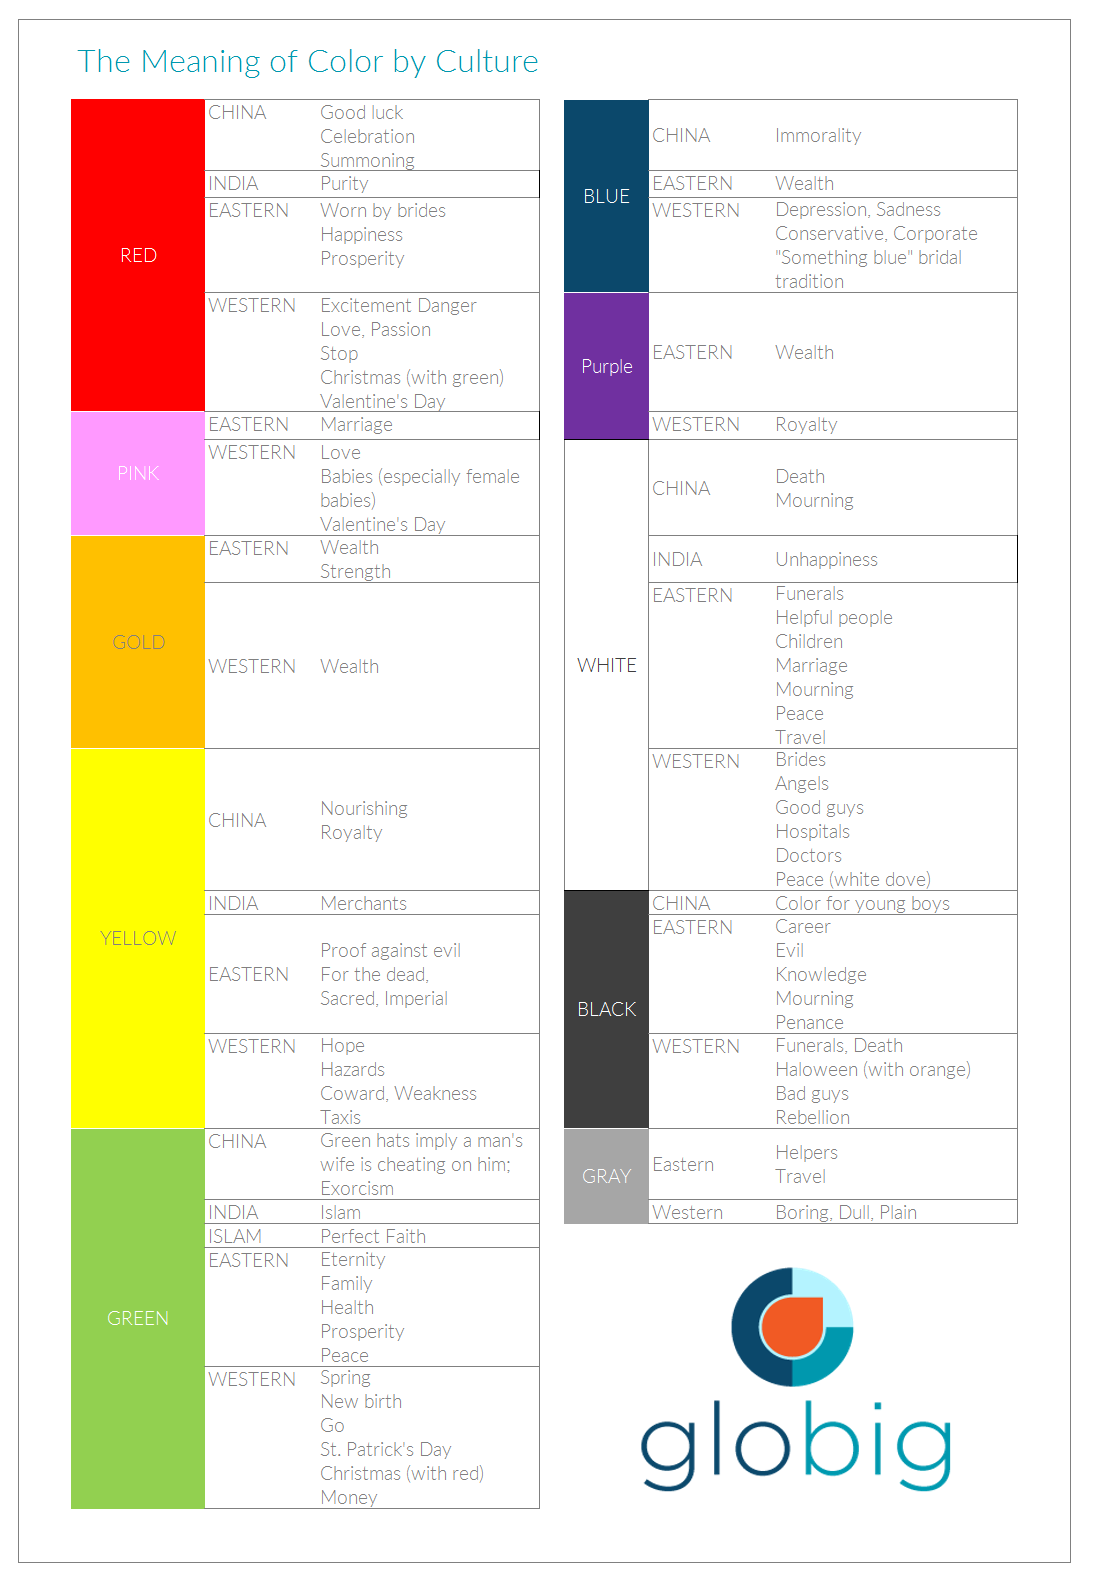 Chart showing the meaning of colors to different cultures